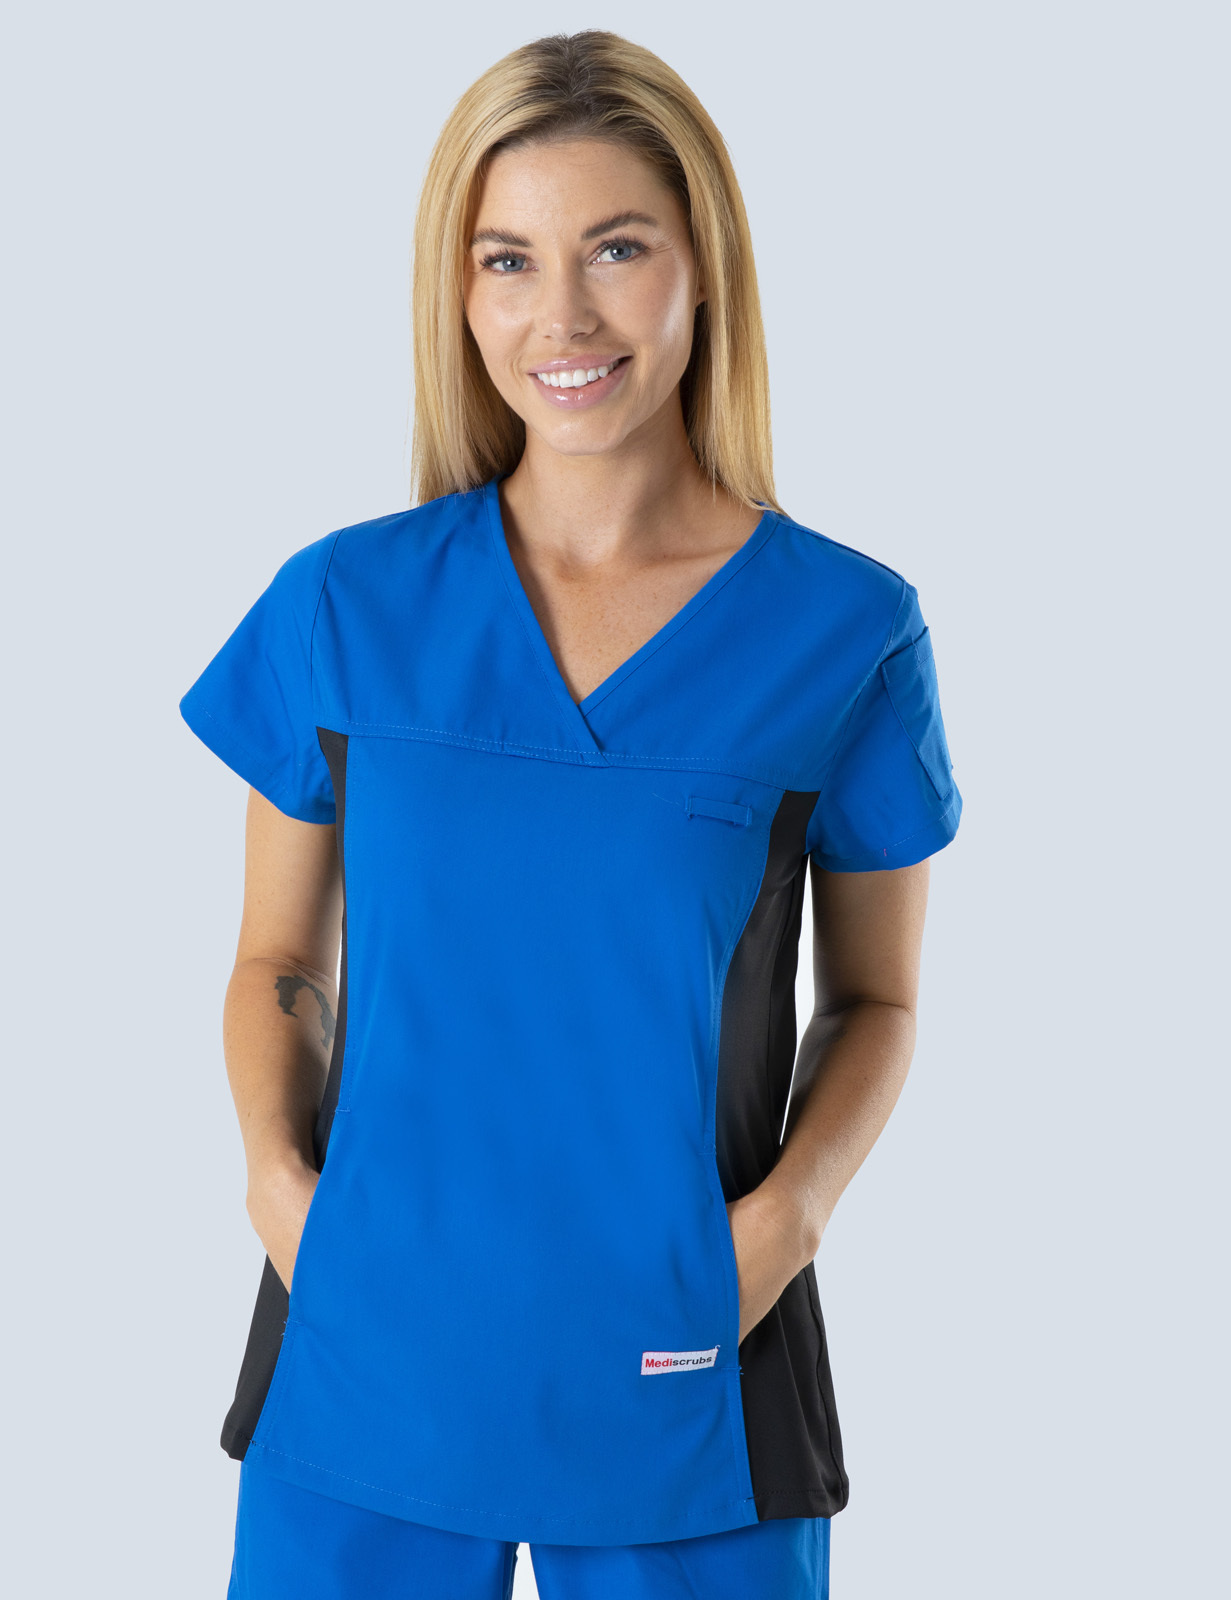 Canberra Hospital Medical Imaging Radiographer Uniform Top Only Bundle (Women's Fit Spandex Top in Royal + Logos)